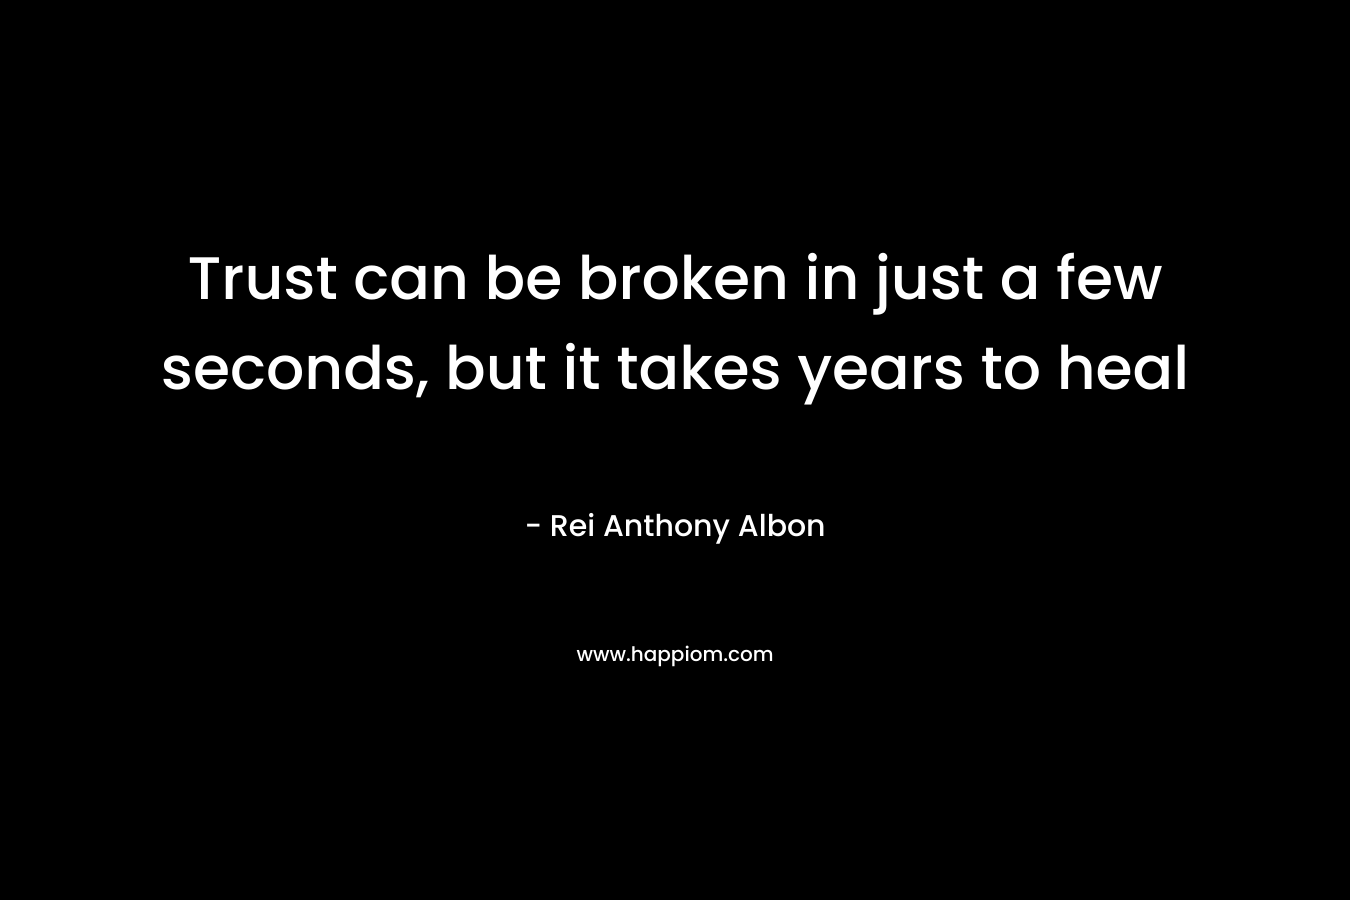 Trust can be broken in just a few seconds, but it takes years to heal